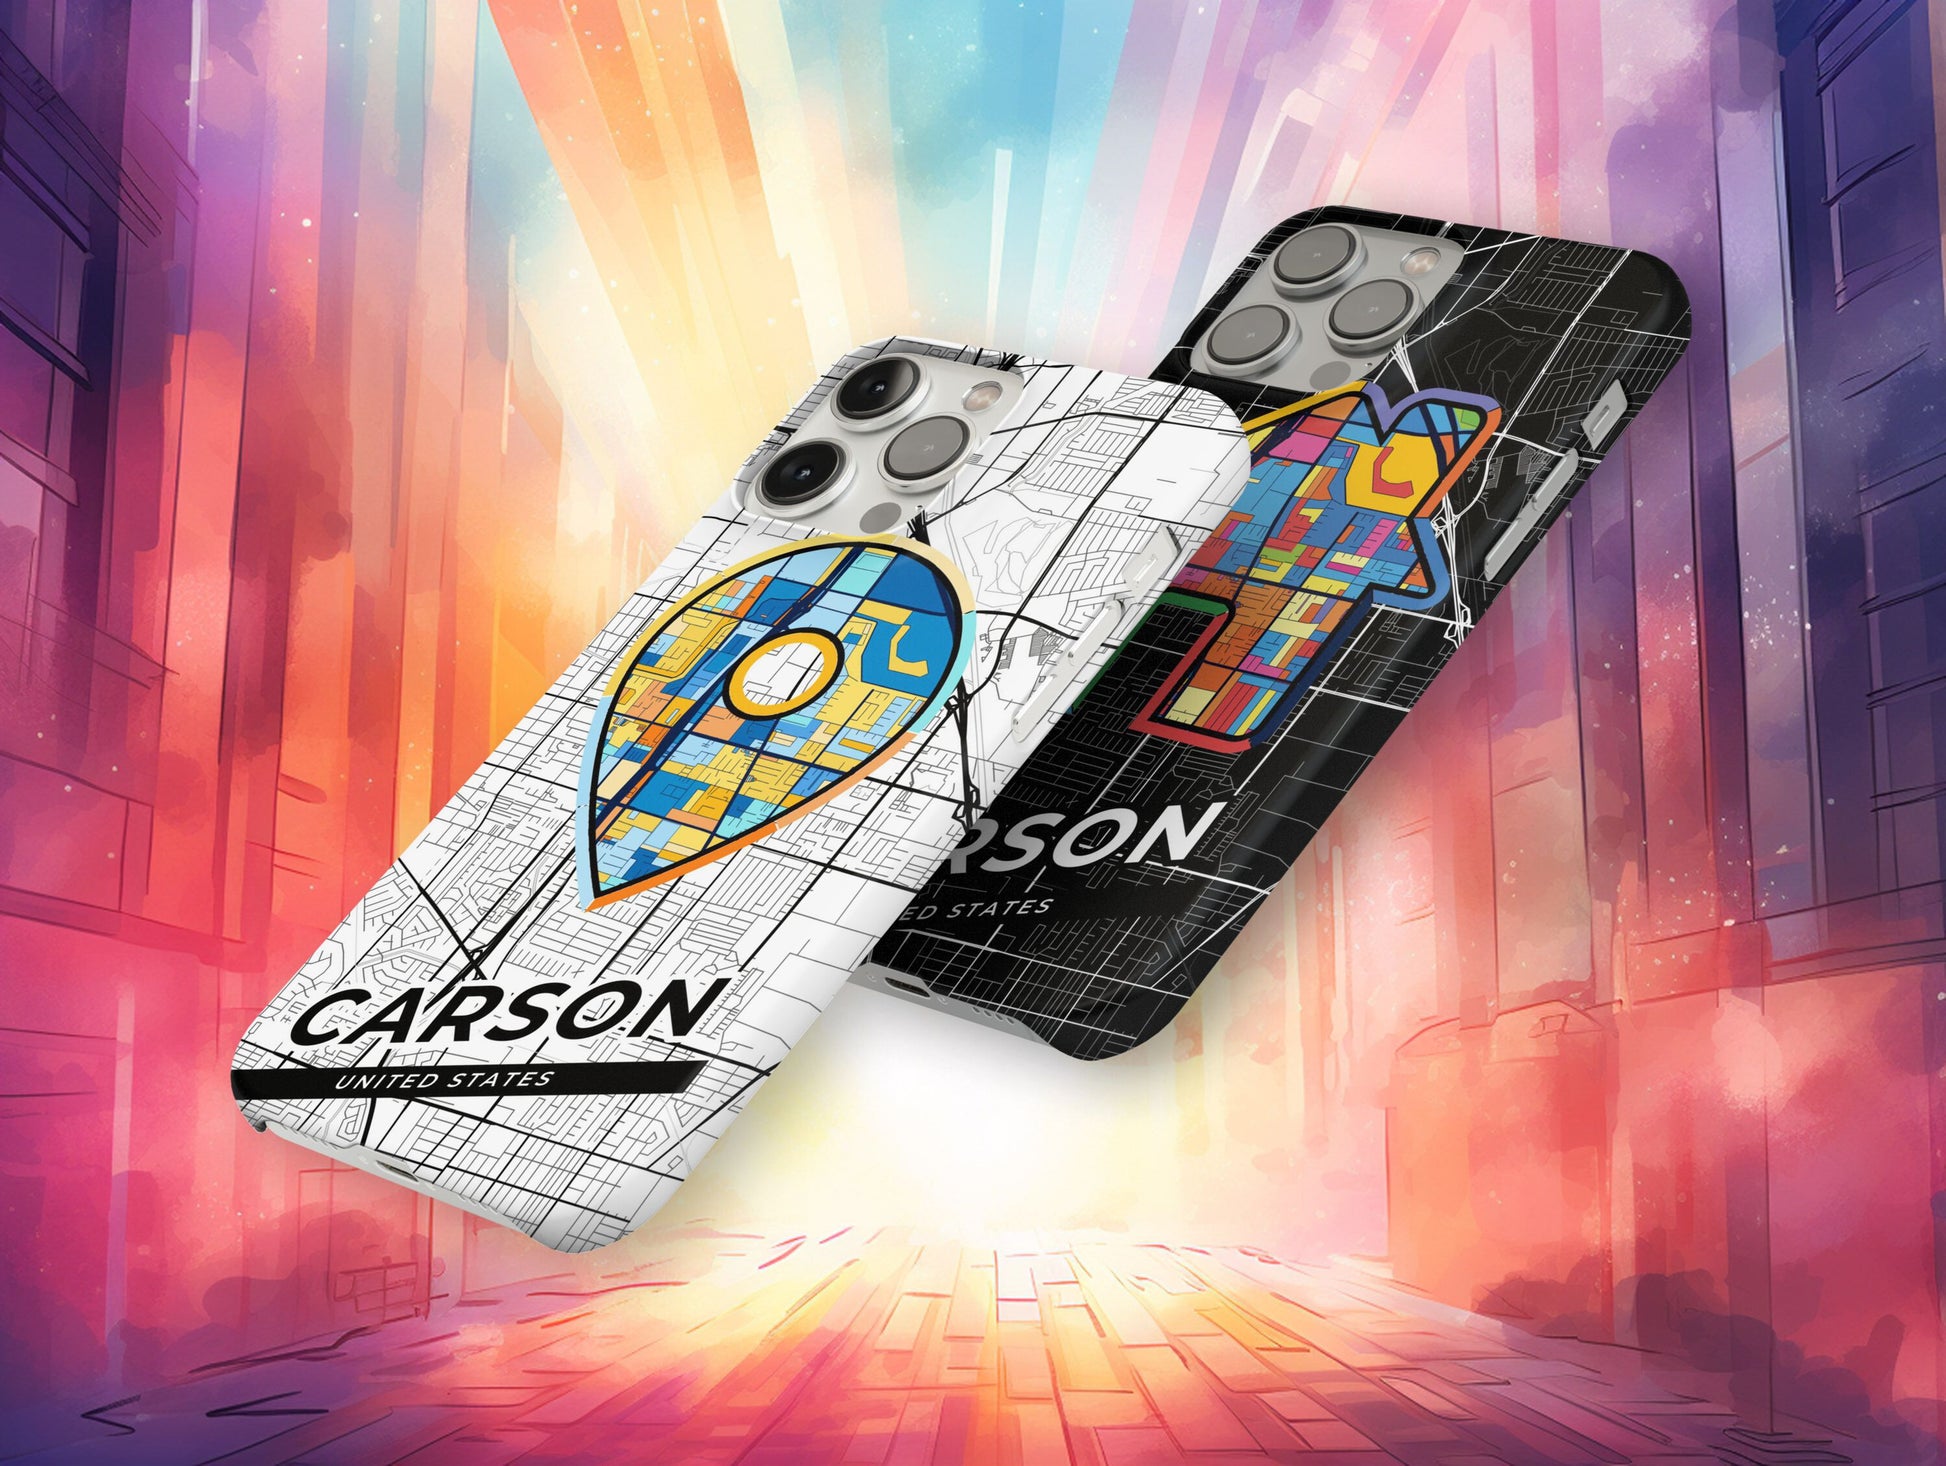 Carson California slim phone case with colorful icon. Birthday, wedding or housewarming gift. Couple match cases.